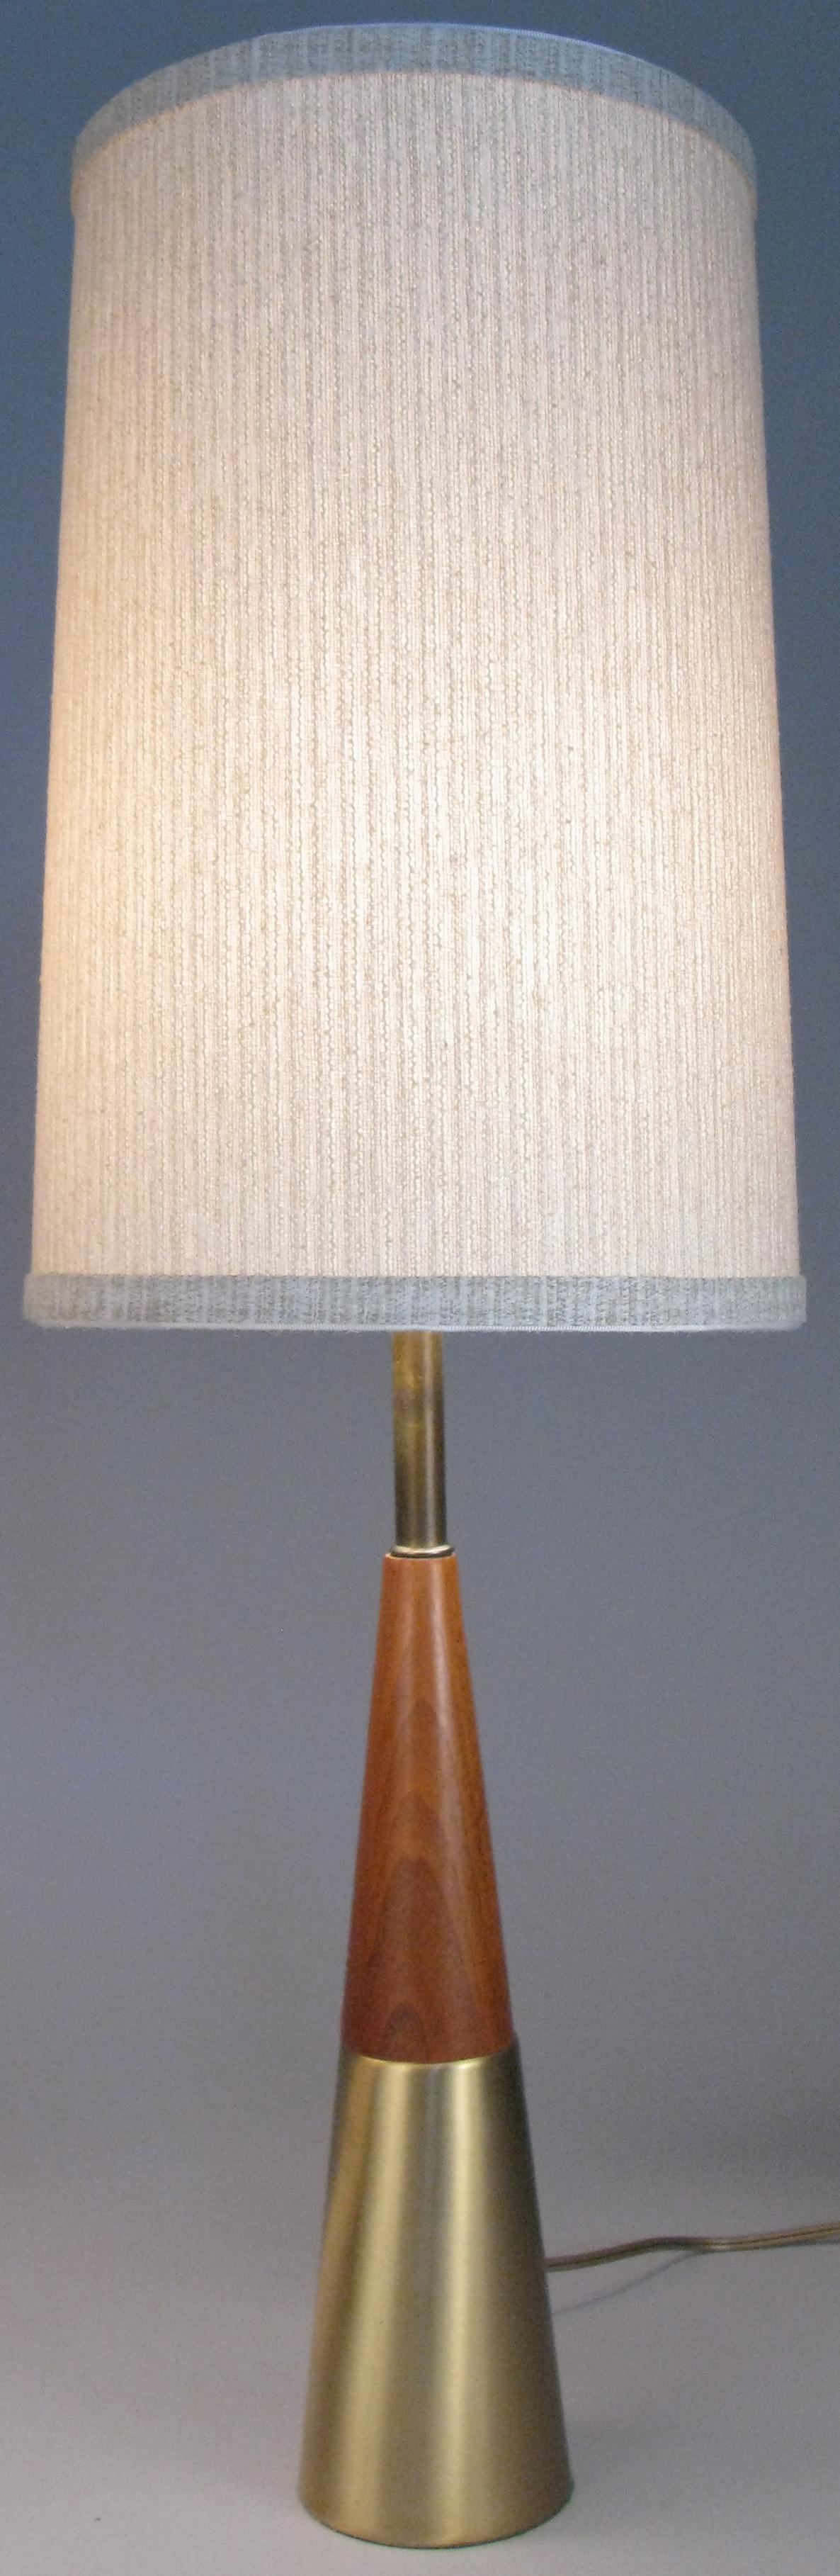 A very handsome pair of vintage 1960s table lamps with tapered bases of polished brass and walnut, designed by Tony Paul. With newly recovered shades.